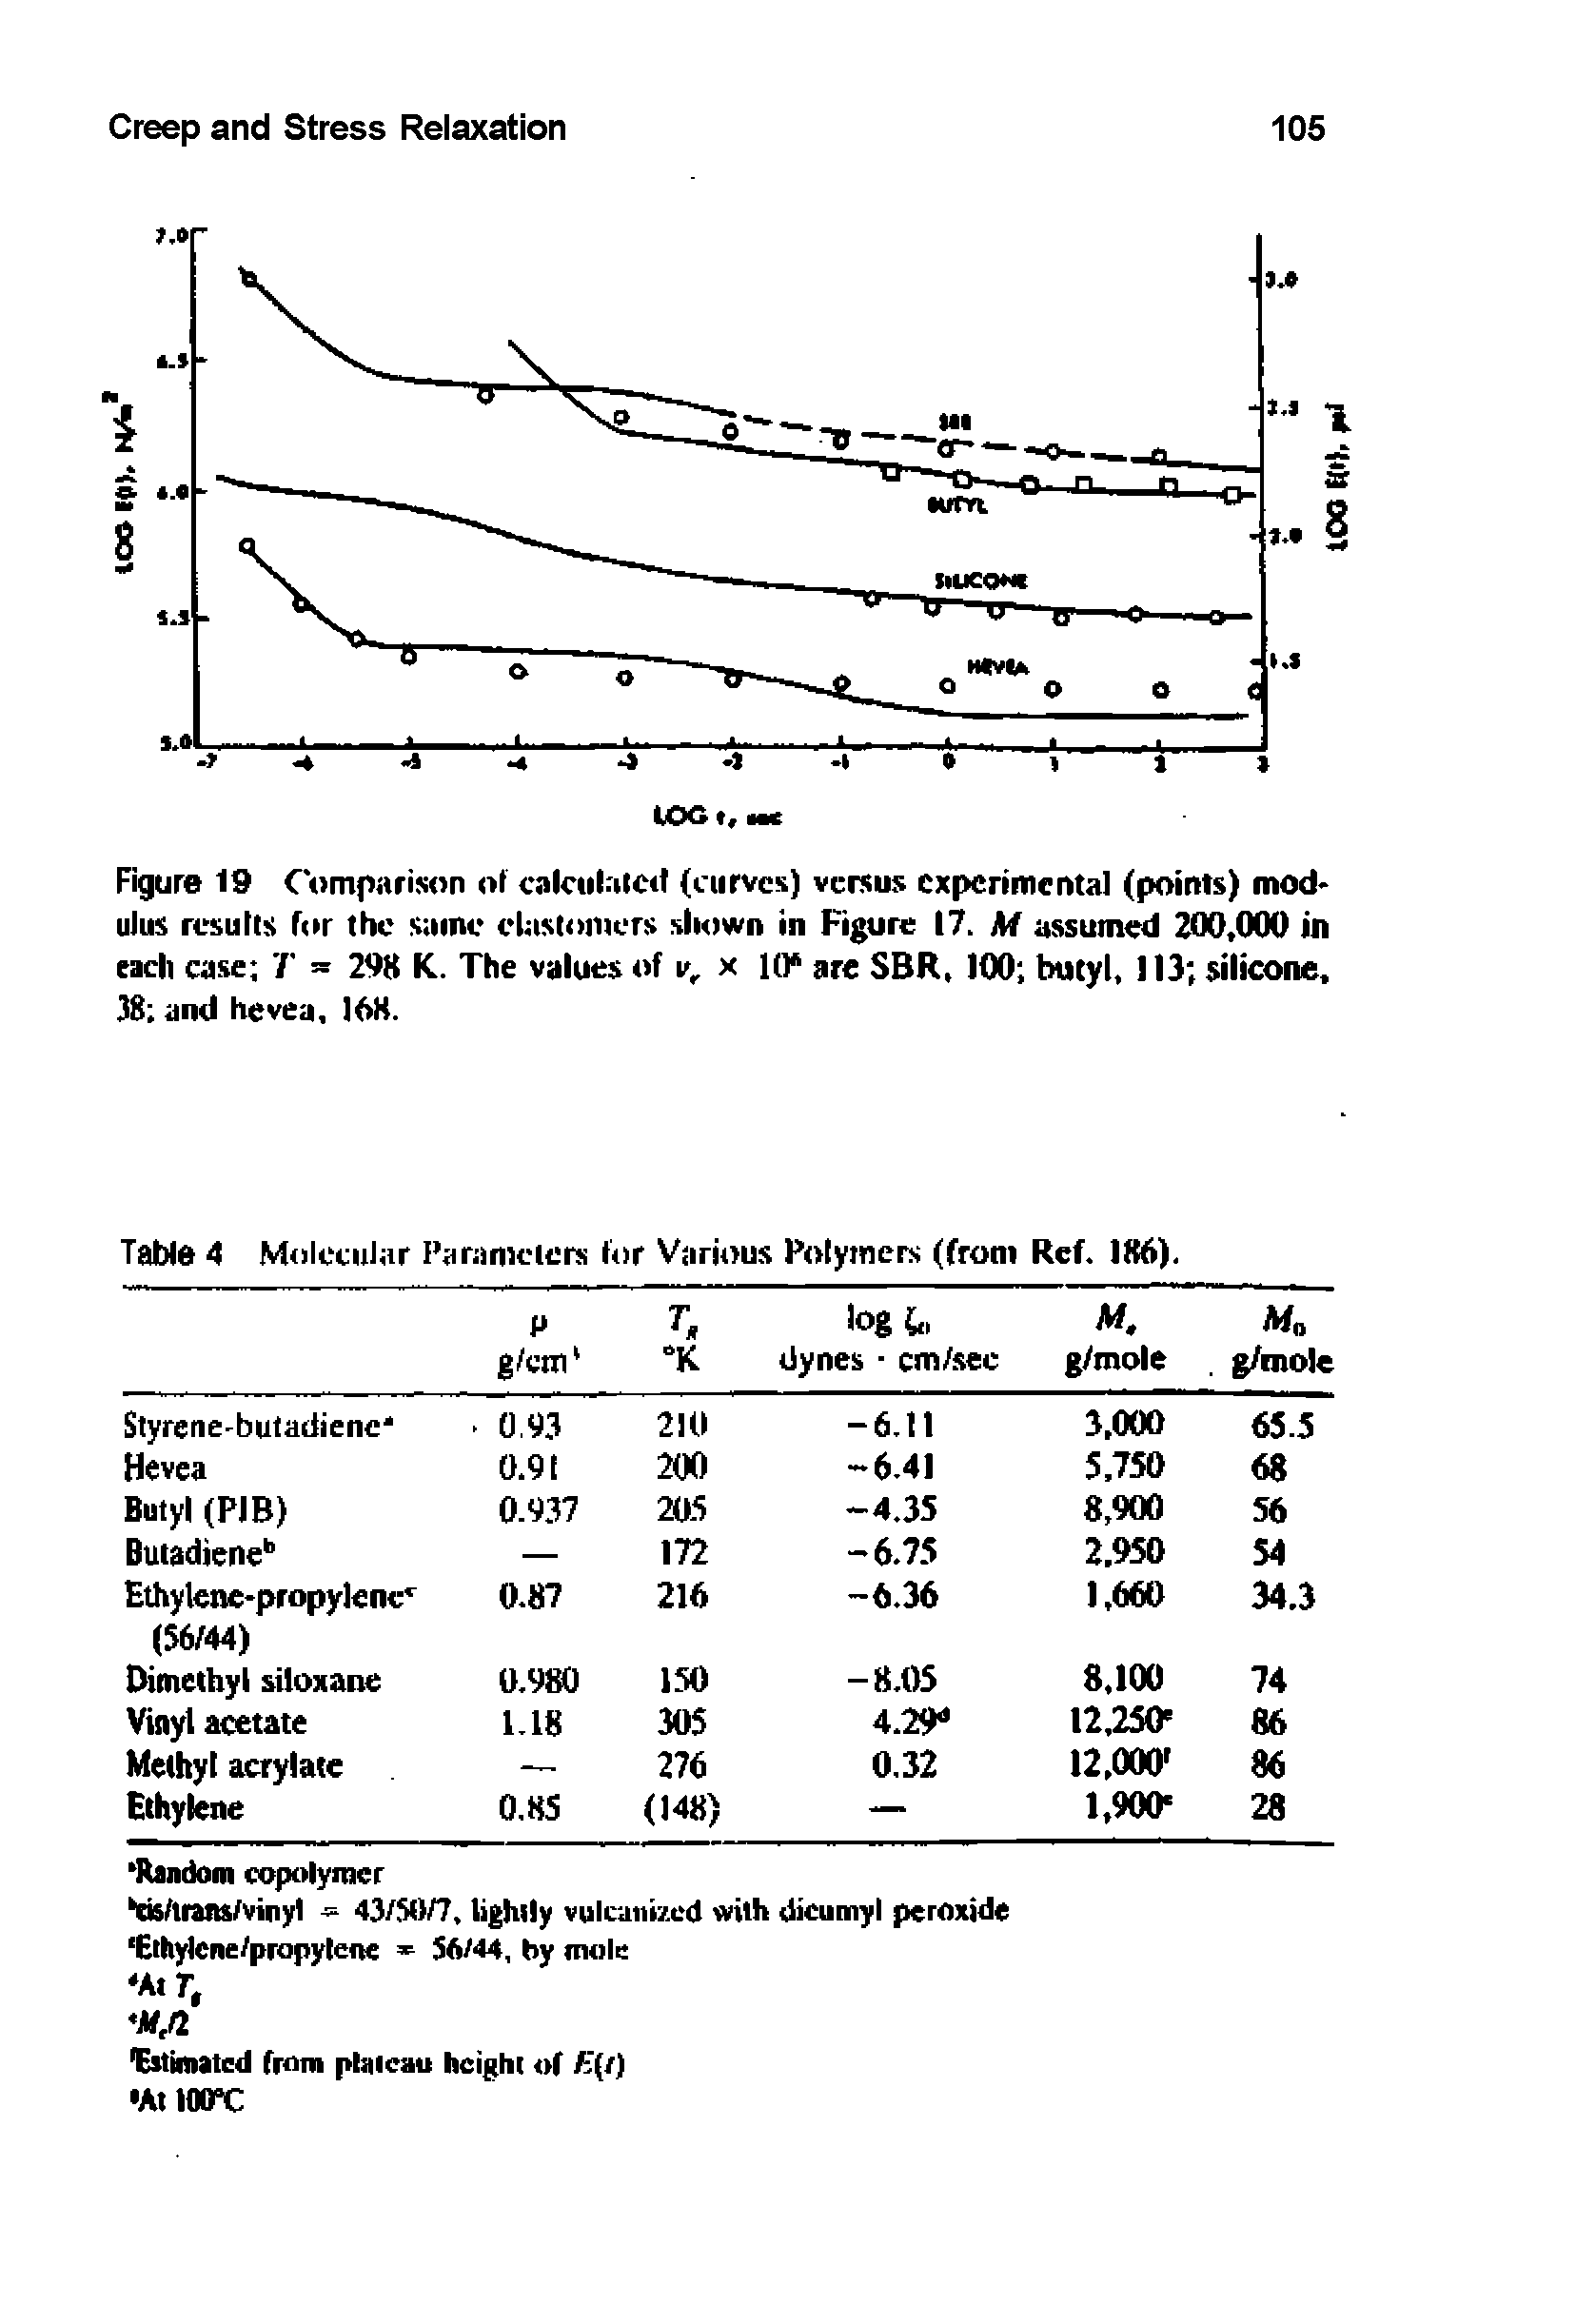 Table 4 Molecular Parameters for Various Polymers (from Ref. 186).